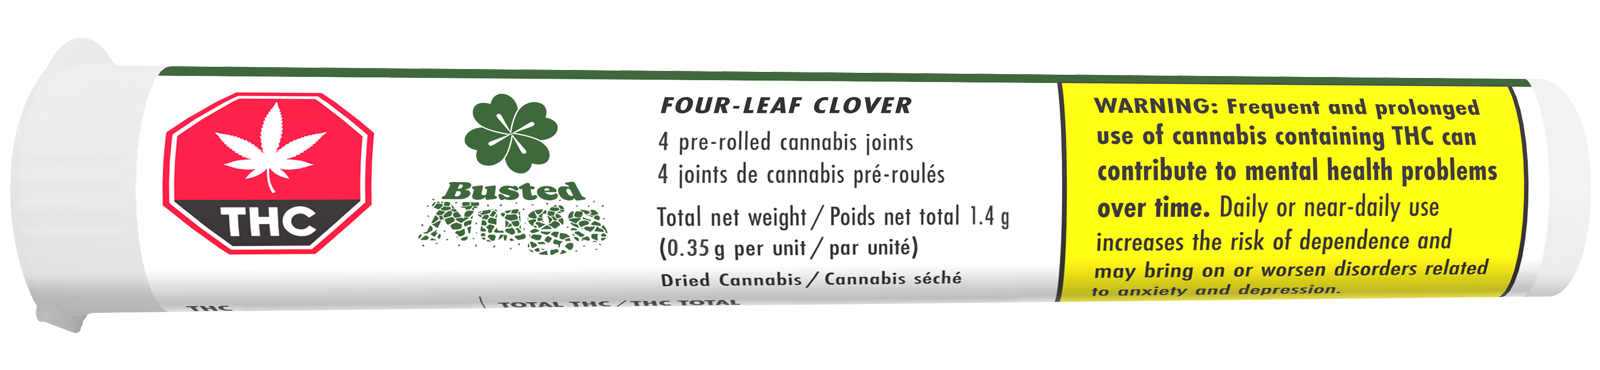 Busted Nugs - Pre-Rolled Four Leaf Clover